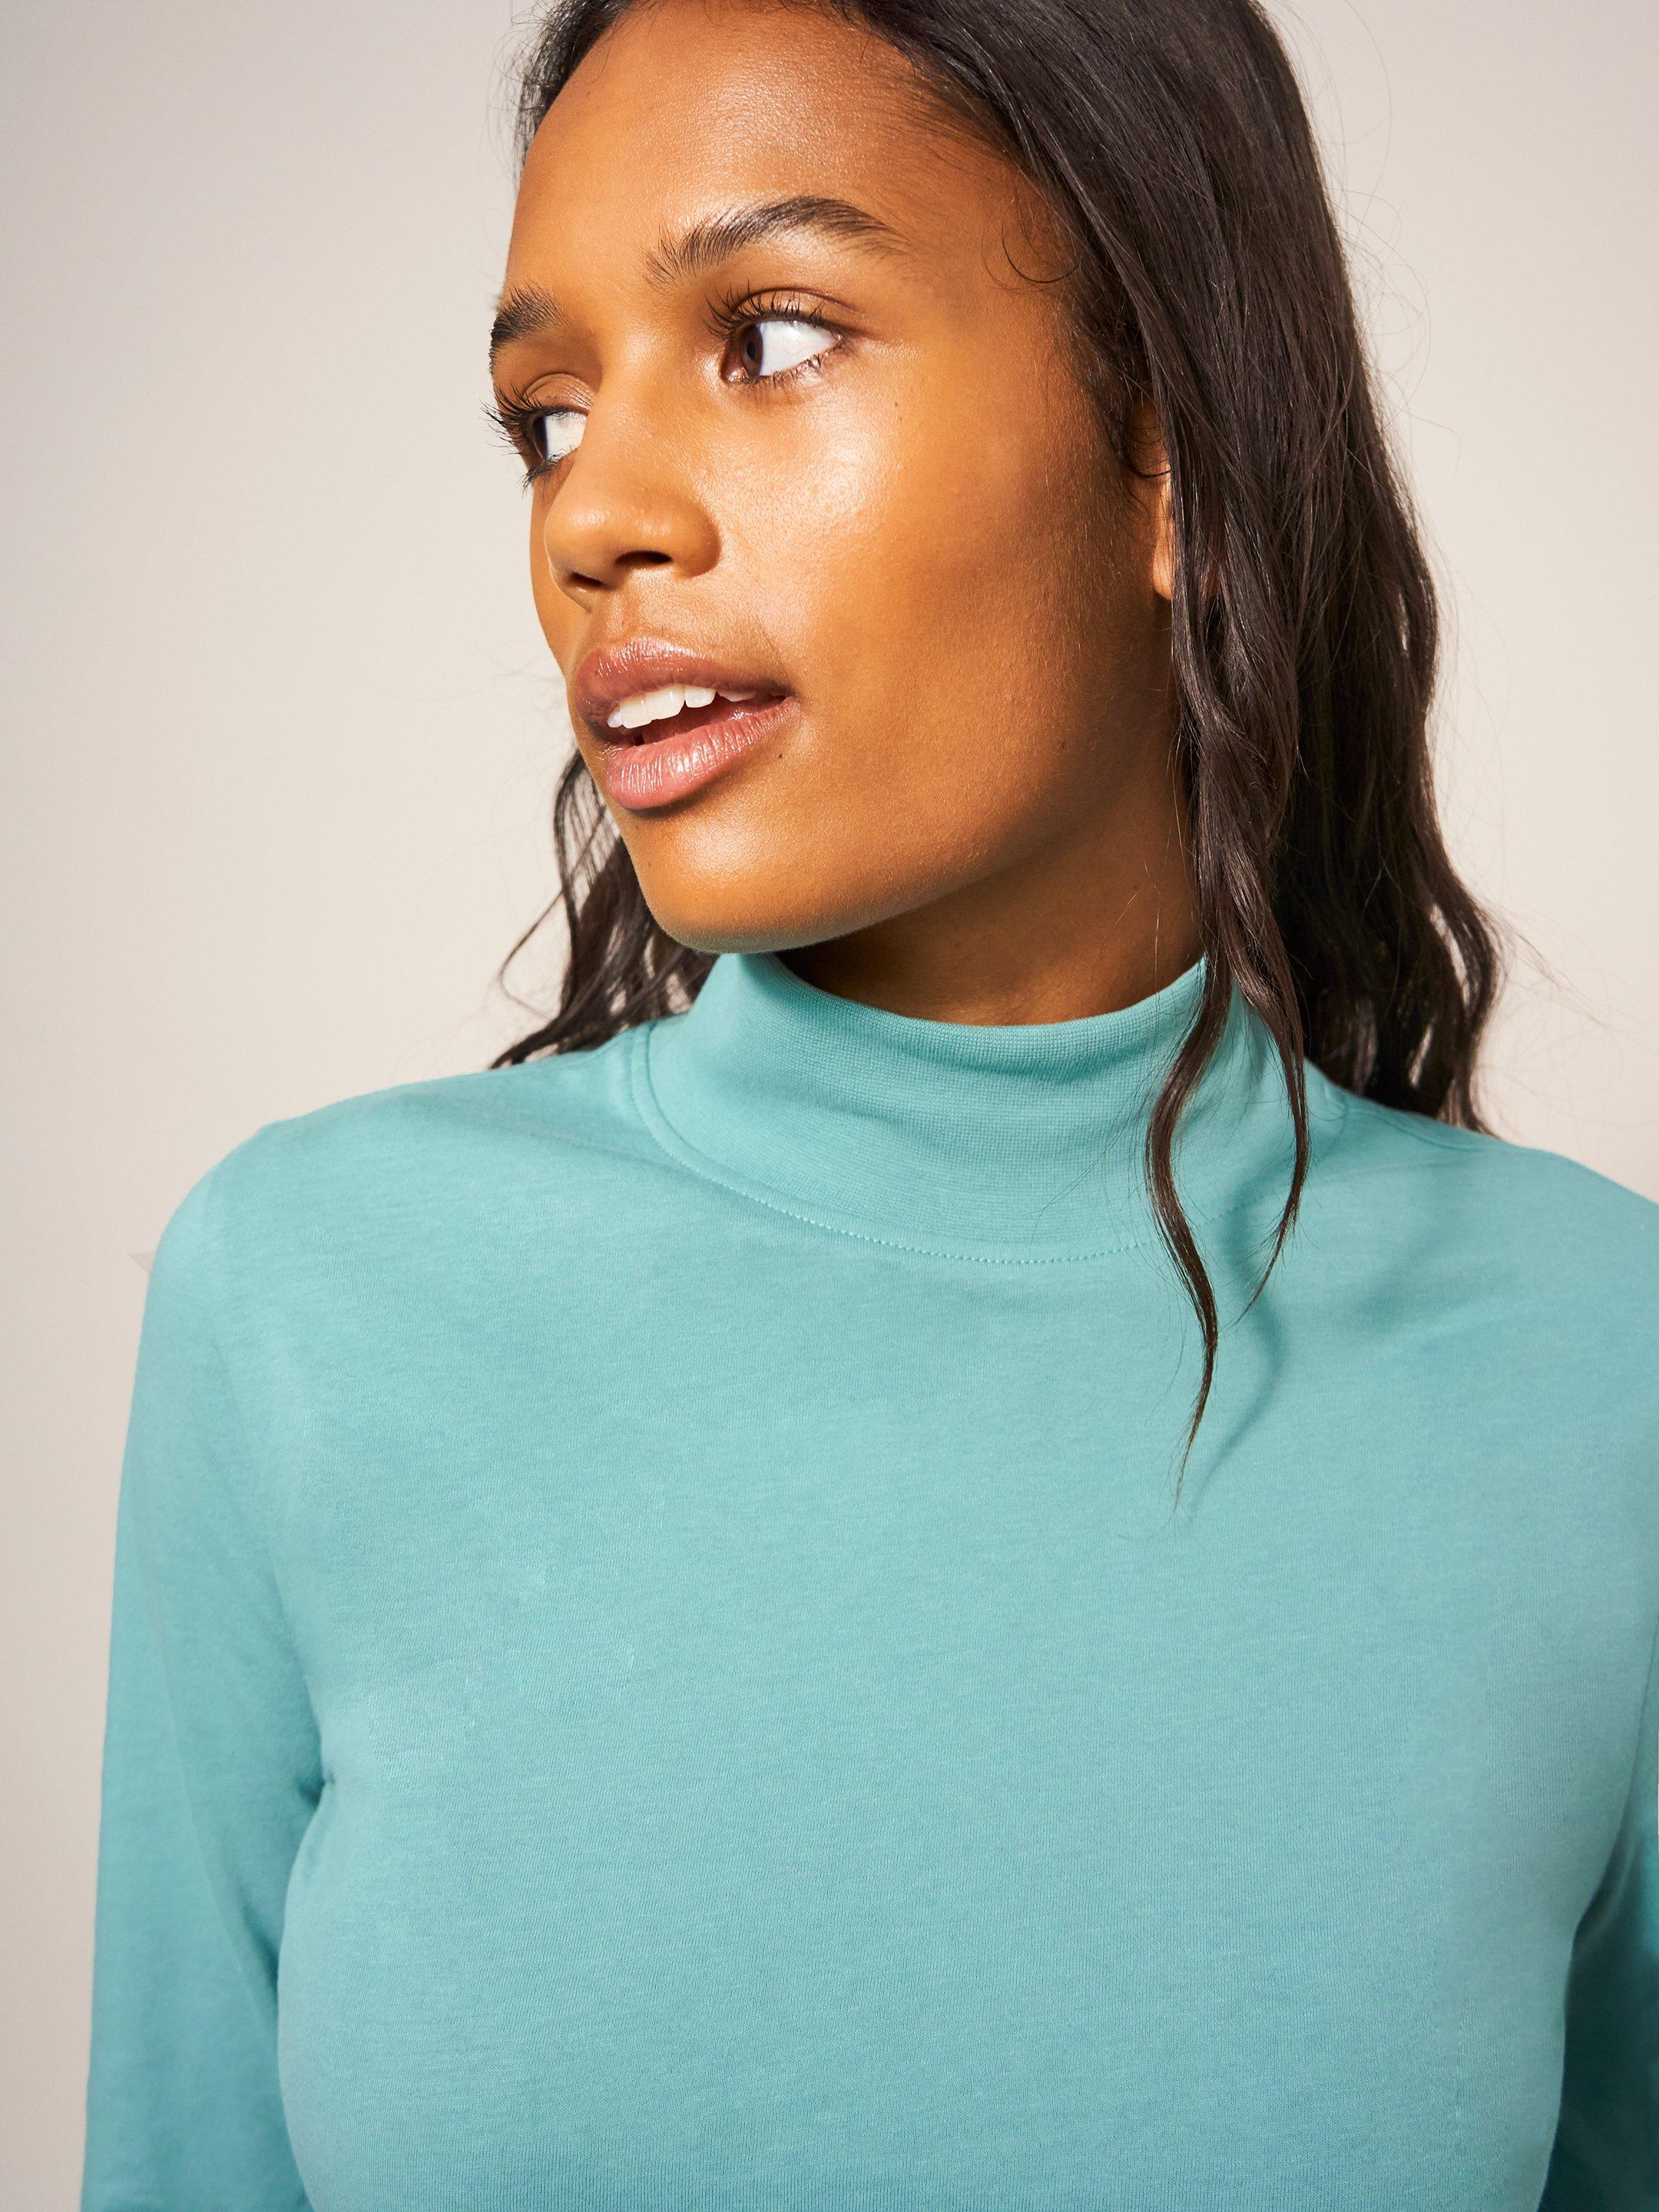 CAMILE HIGH NECK TEE in LGT TEAL - MODEL FRONT